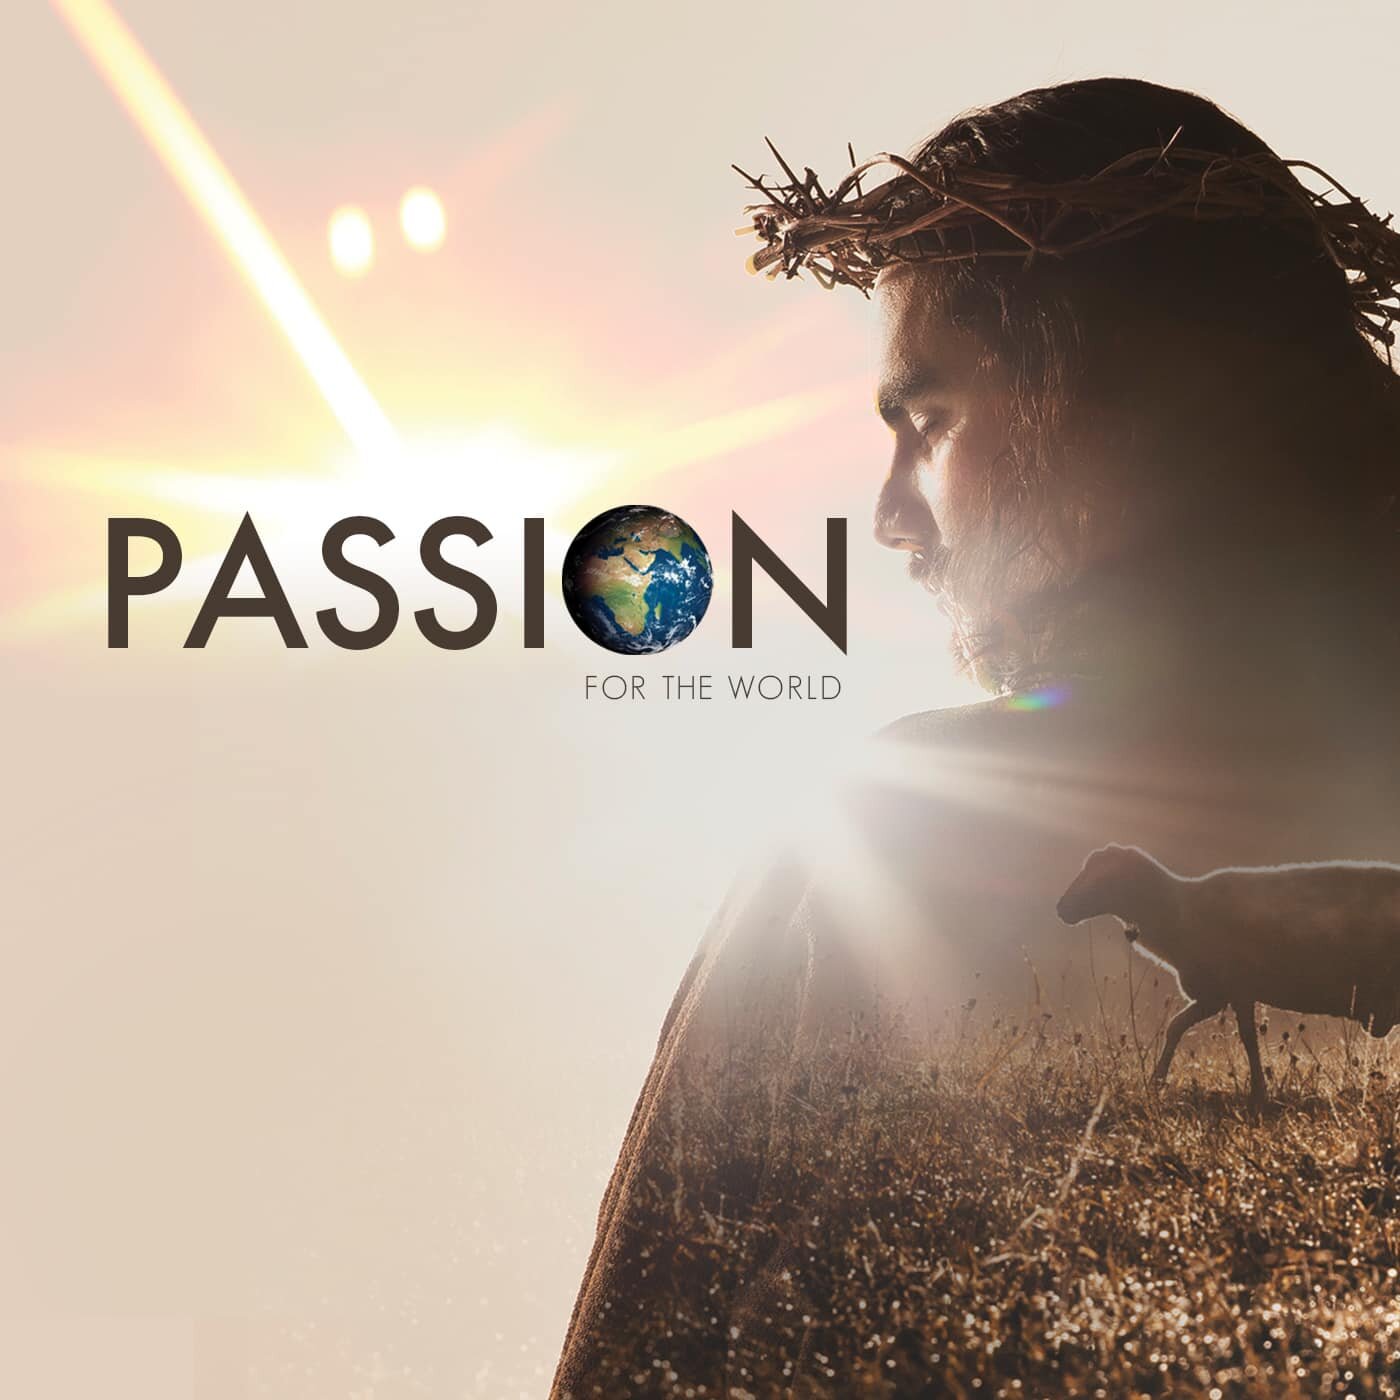 Passion [for the world]
New series begins this Sunday!
9:30 or 11:00am (Owasso or Tulsa)

Jesus 

He lived a righteous life. His death delivered the gift of repentance. His resurrection transforms our lives and redeems our sins to make us the righteo